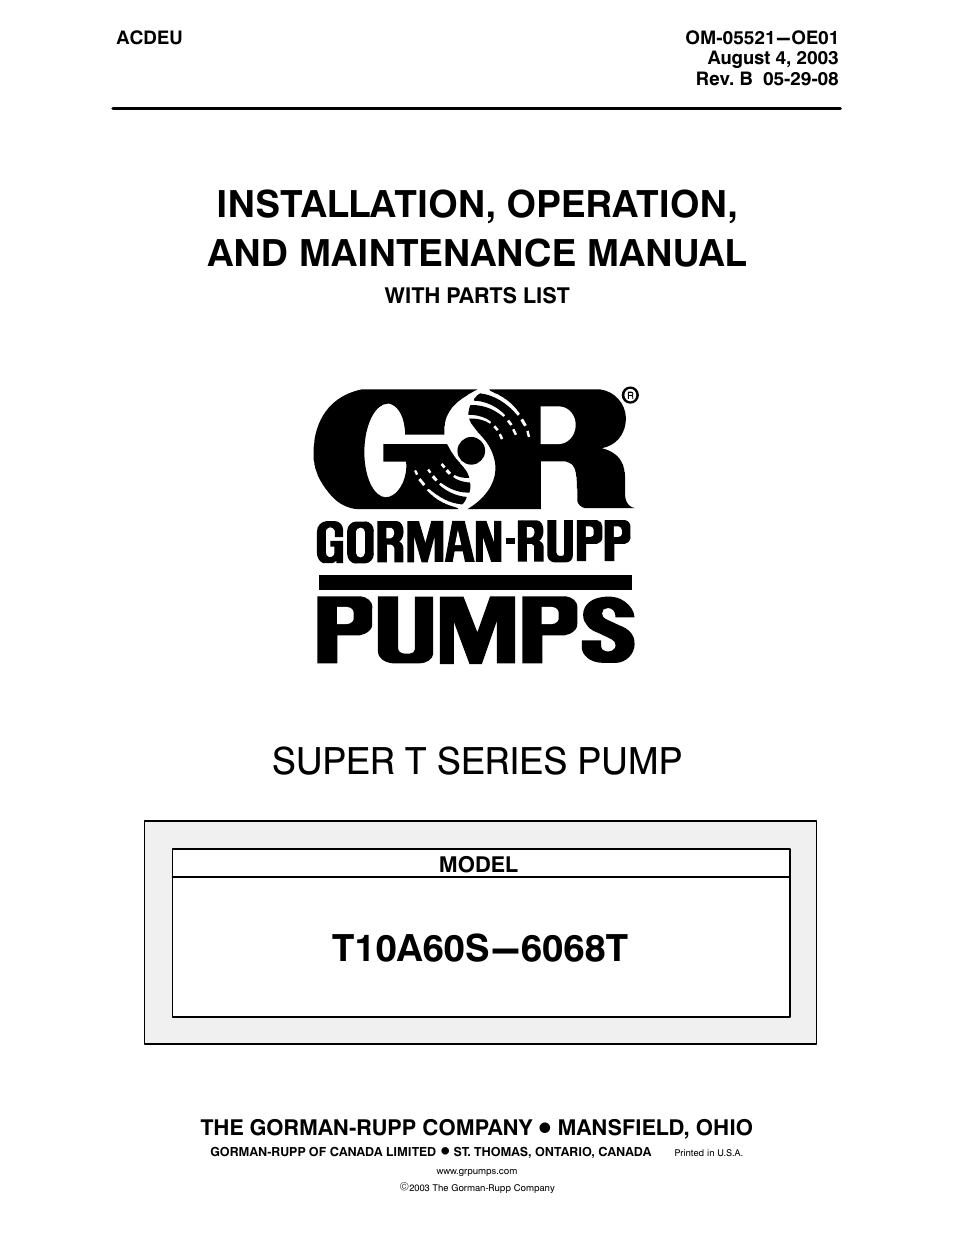 Gorman-Rupp Pumps T10A60S-6068T 1268074 and up User Manual | 50 pages